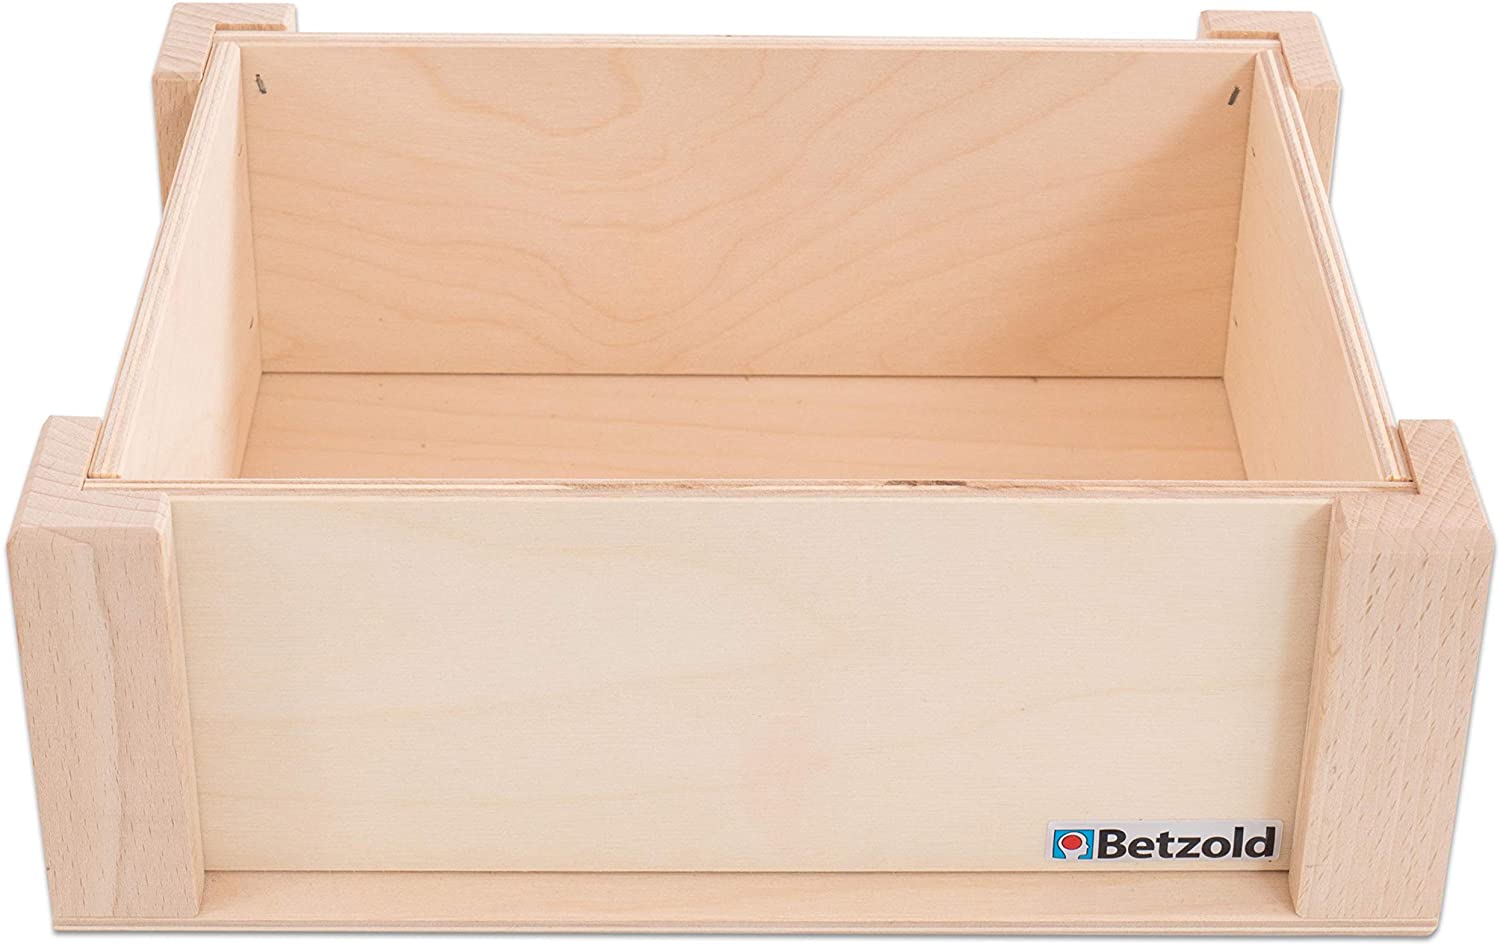 Betzold Wooden Box for Glue Sticks Small or Large